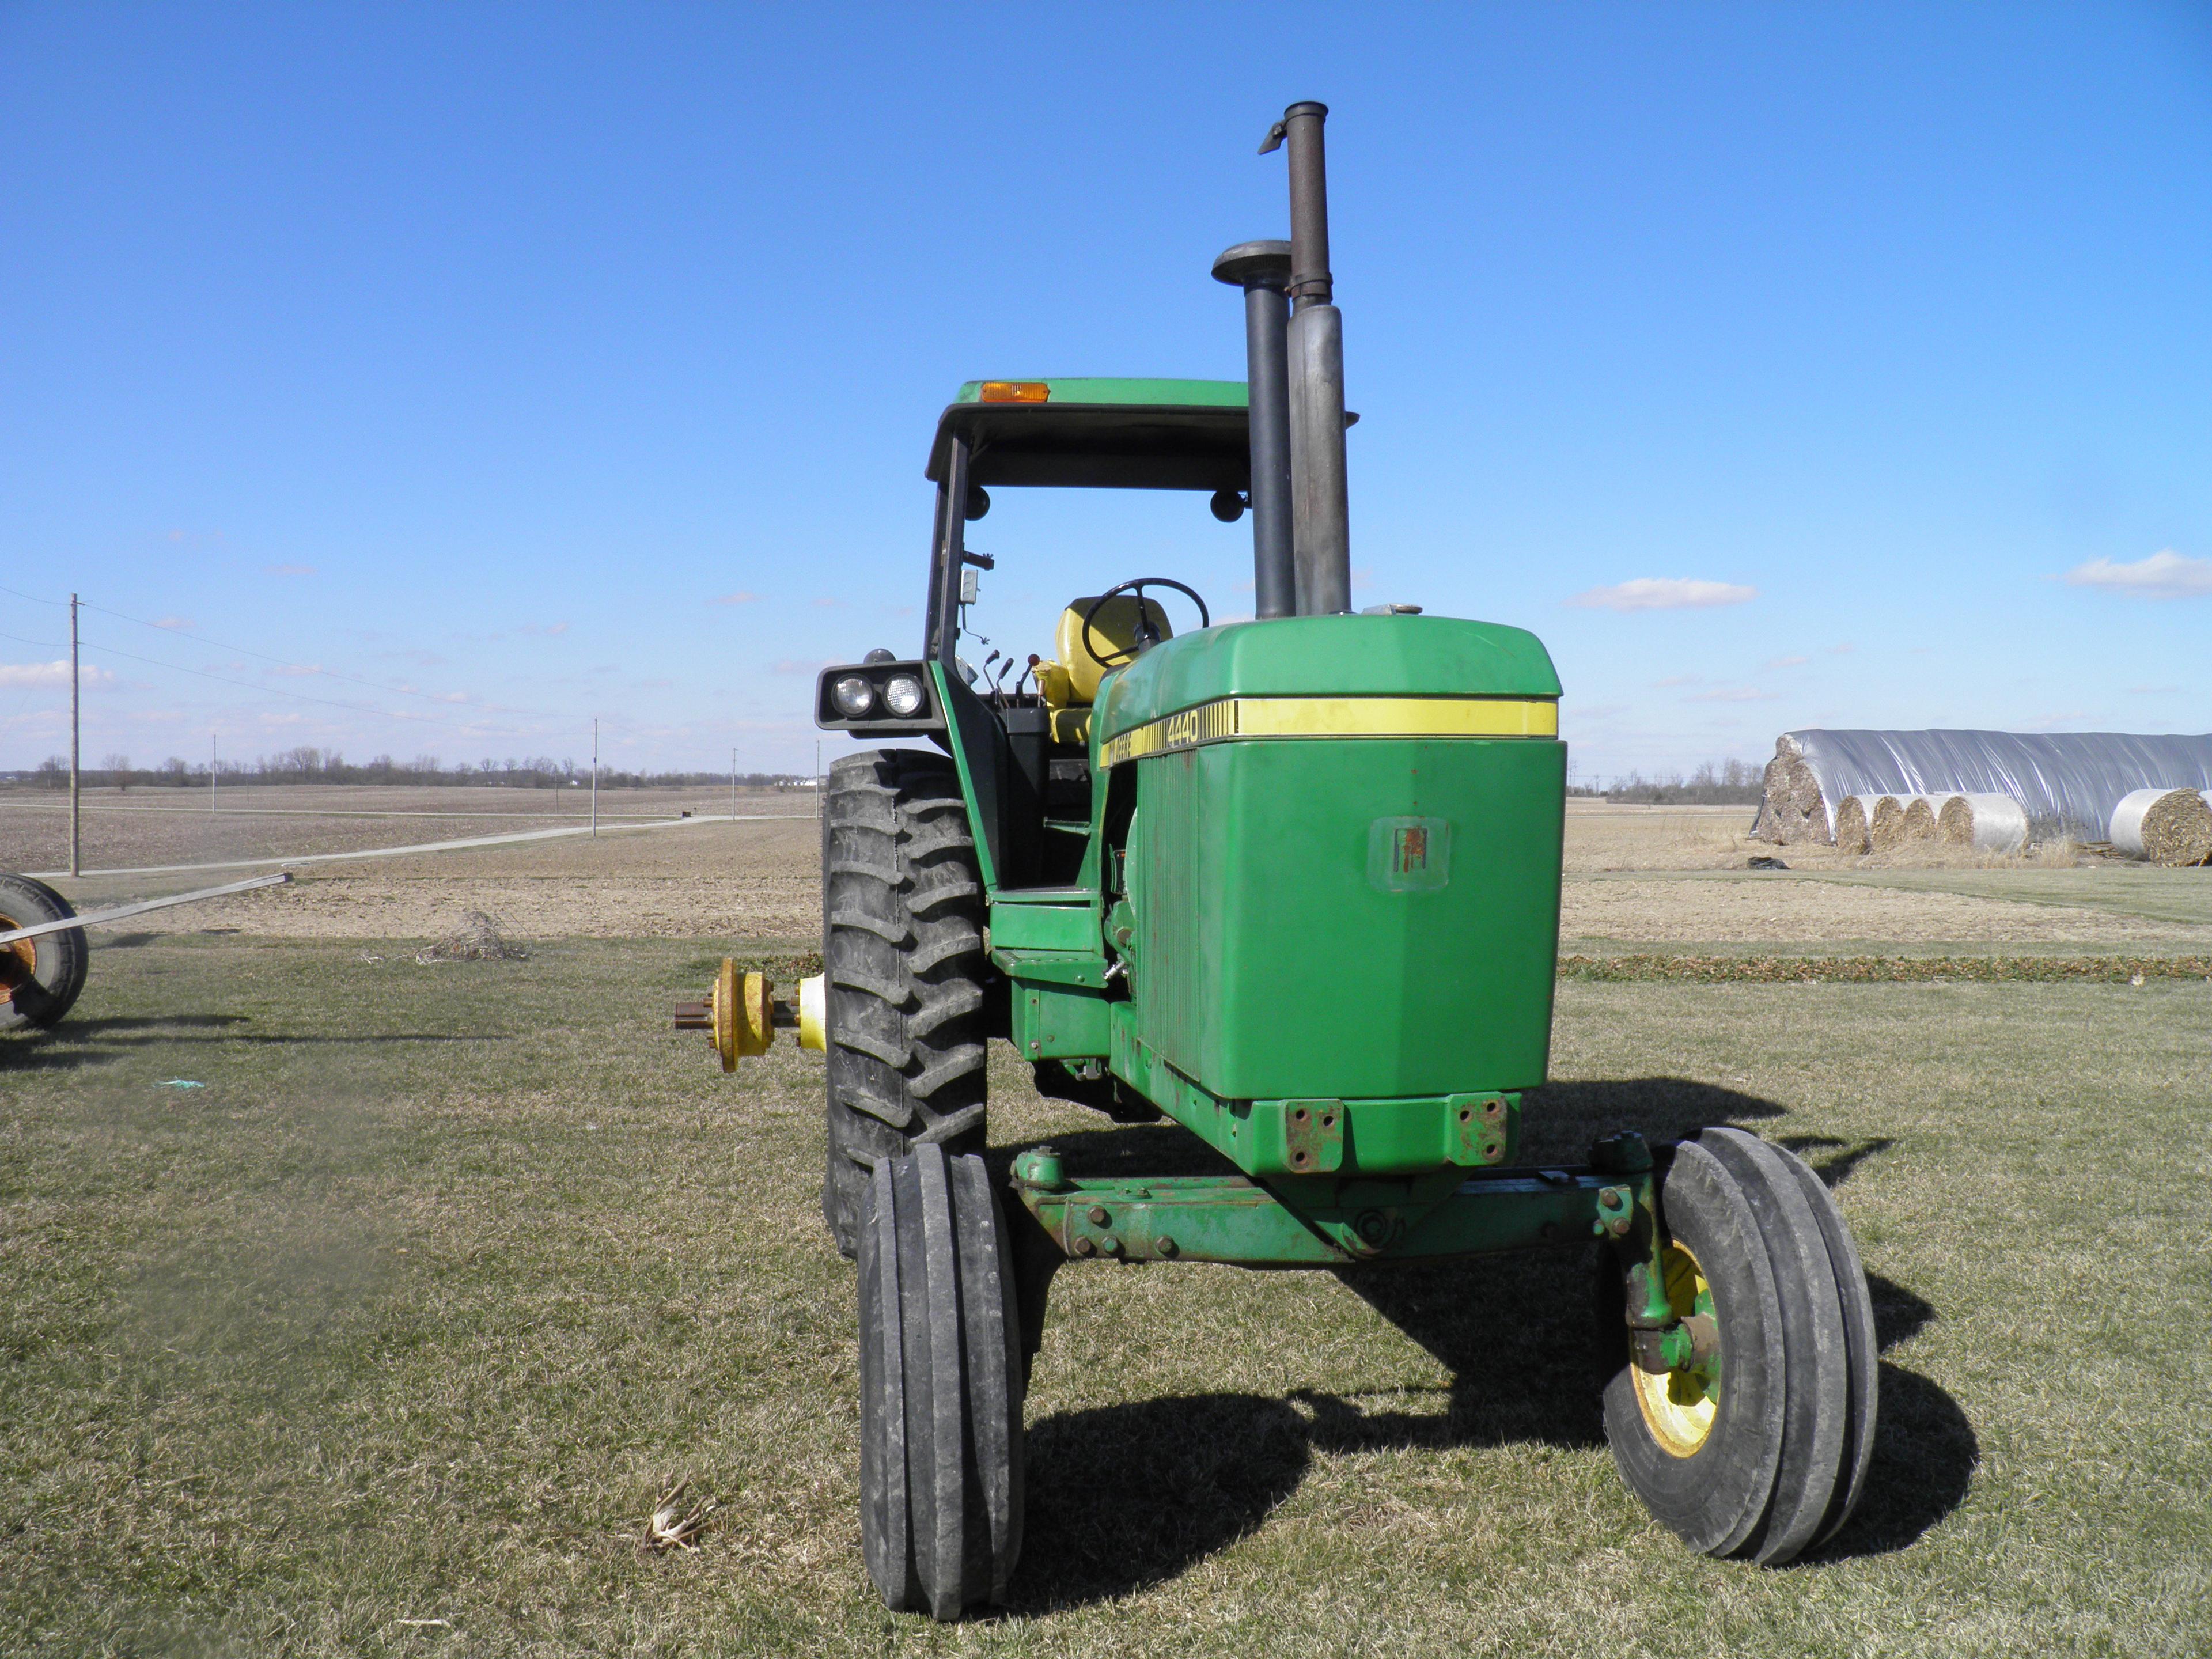 JD 4440 8sp. Powershift, 100% rear tires 18.4-38, approx. 6,000 Hrs. new re